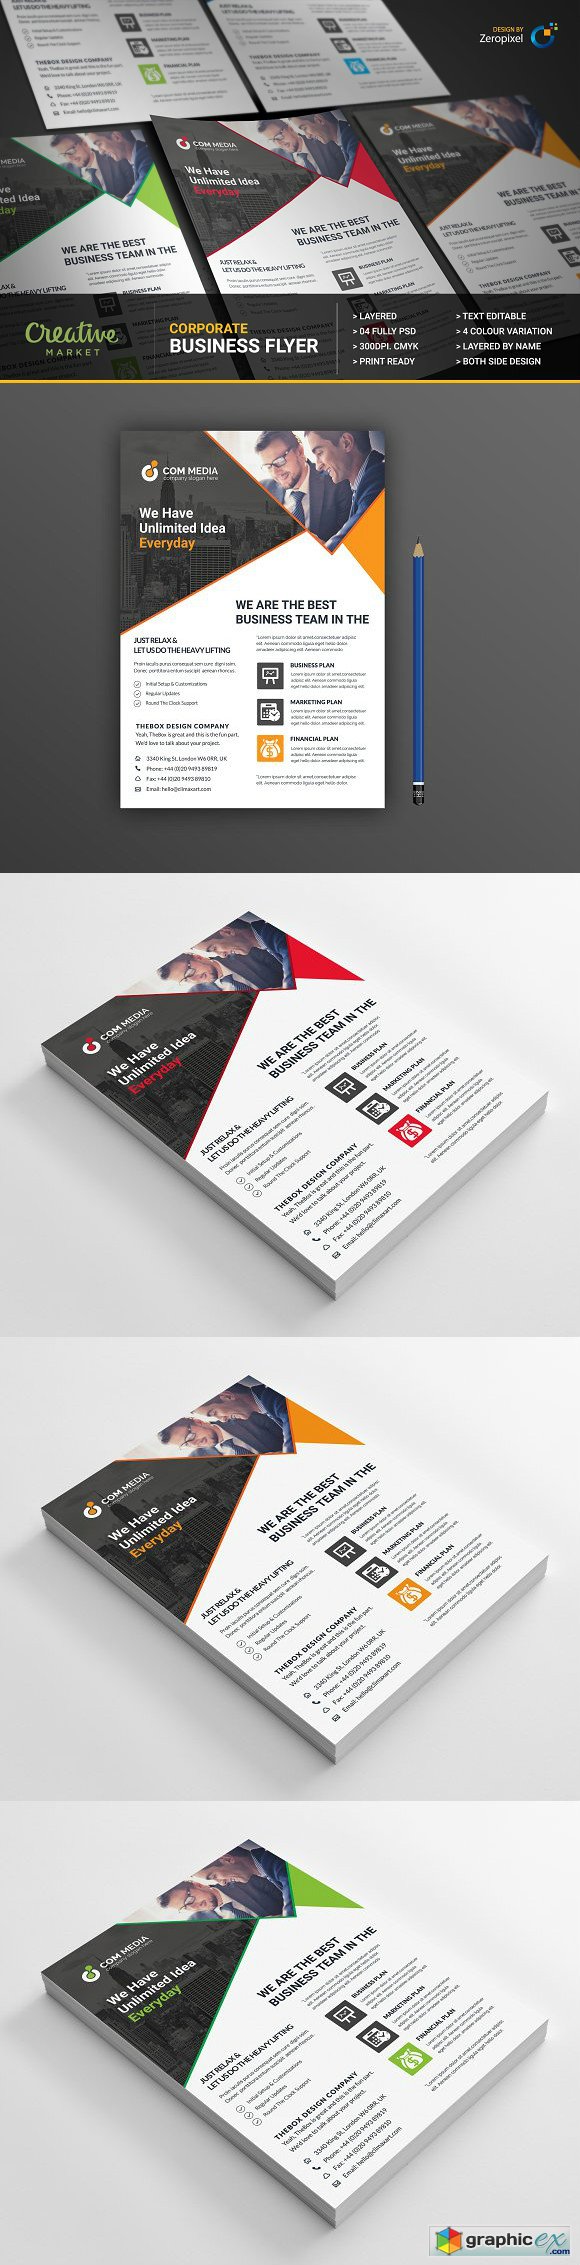 Corporate Business Flyer 1174211